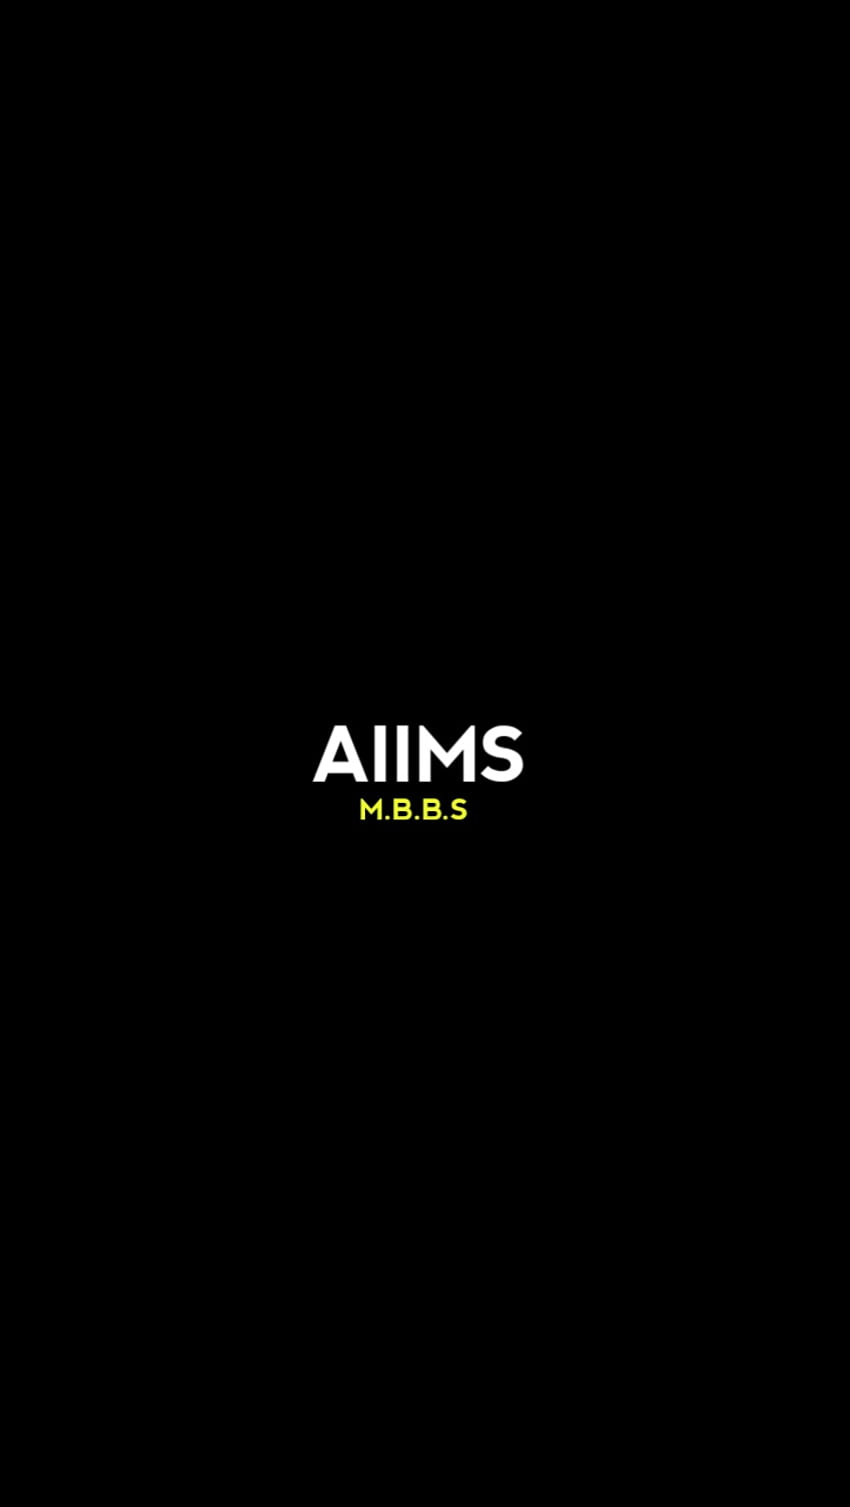 AIIMS Logo | Best Corporate Video Production Services in Delhi NCR, India